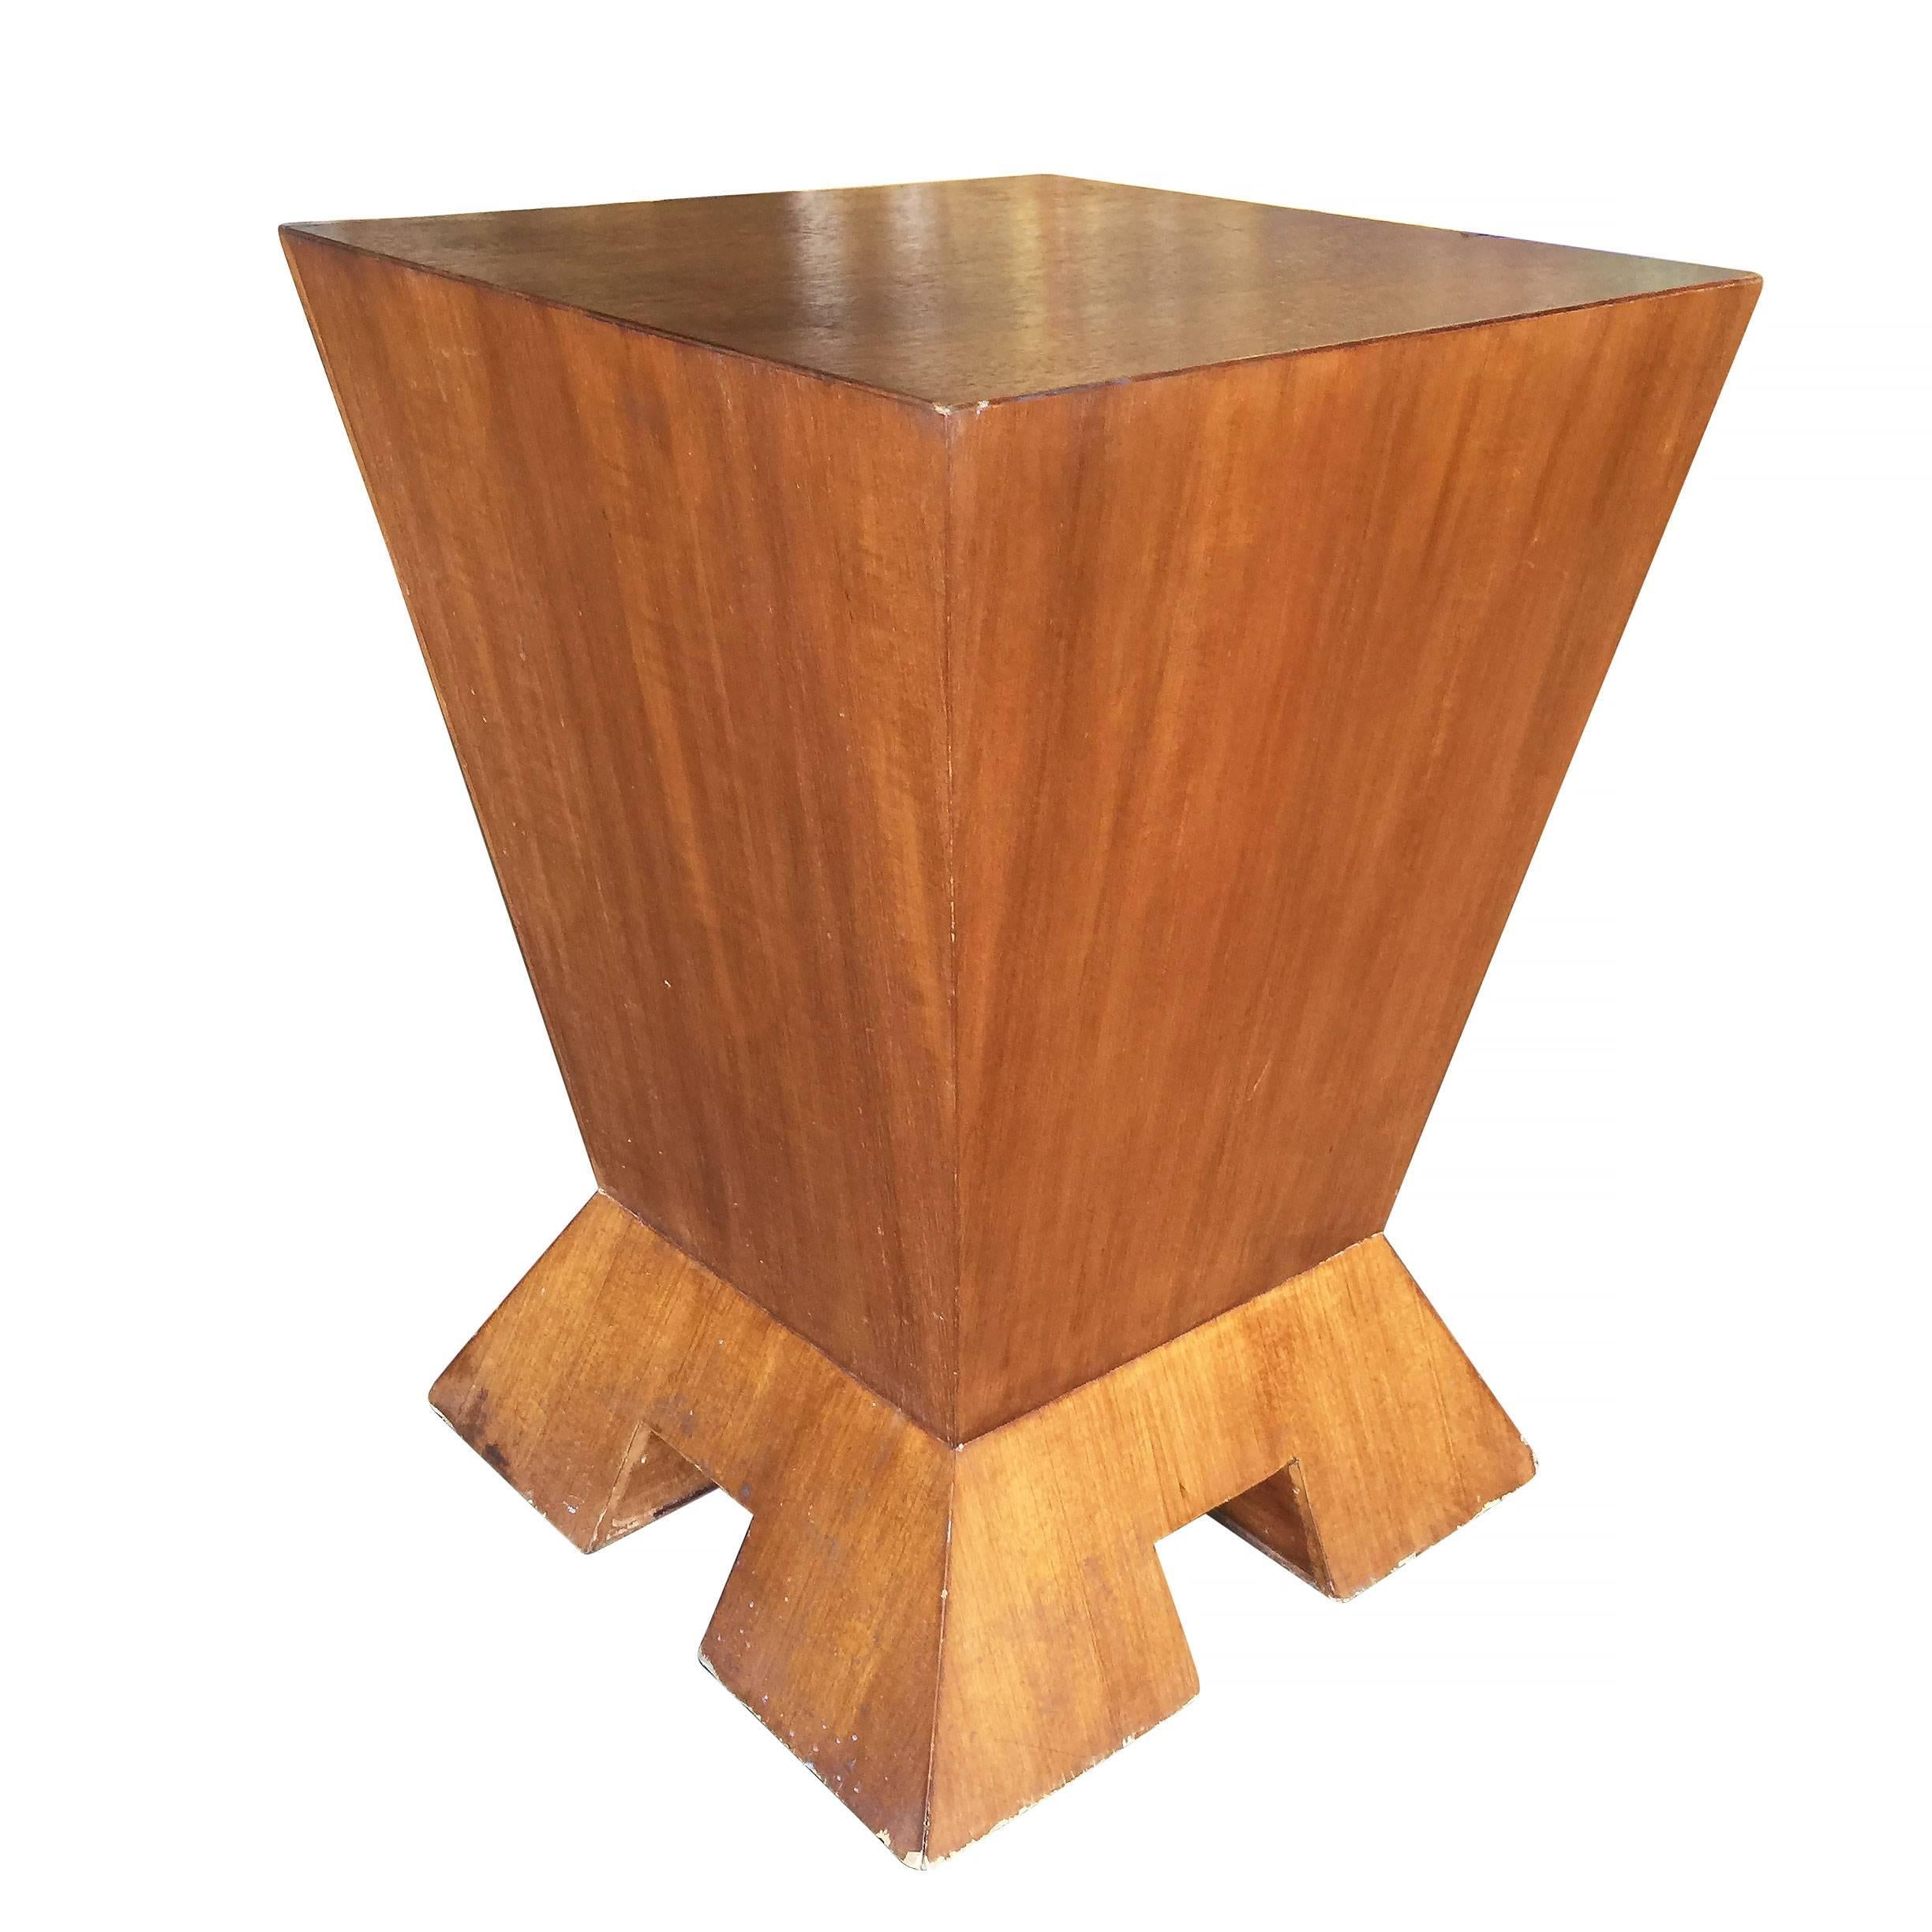 American Modernist Midcentury Inverted Triangle Bedside Table For Sale